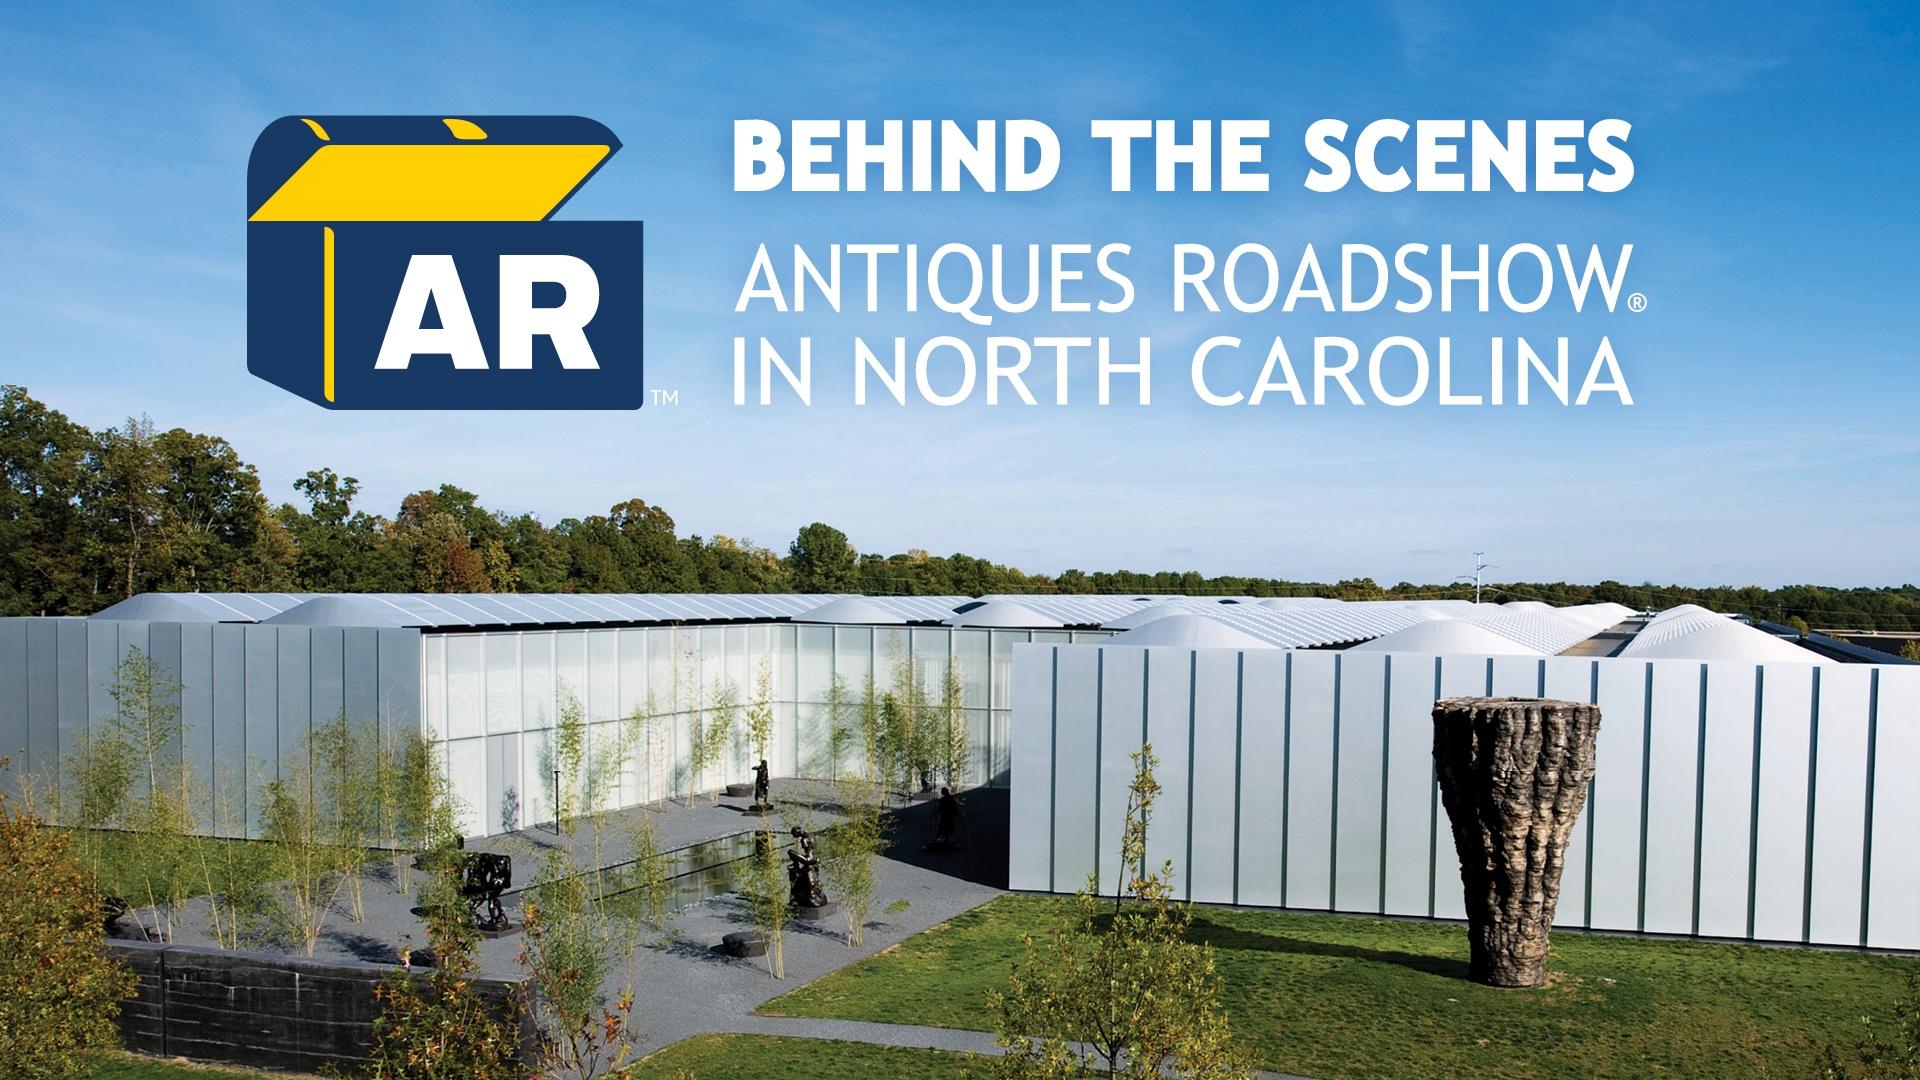 The Antiques Roadshow logo with the text "Behind the Scenes Antiques Roadshow in North Carolina" over an aerial image of the North Carolina Museum of Art.